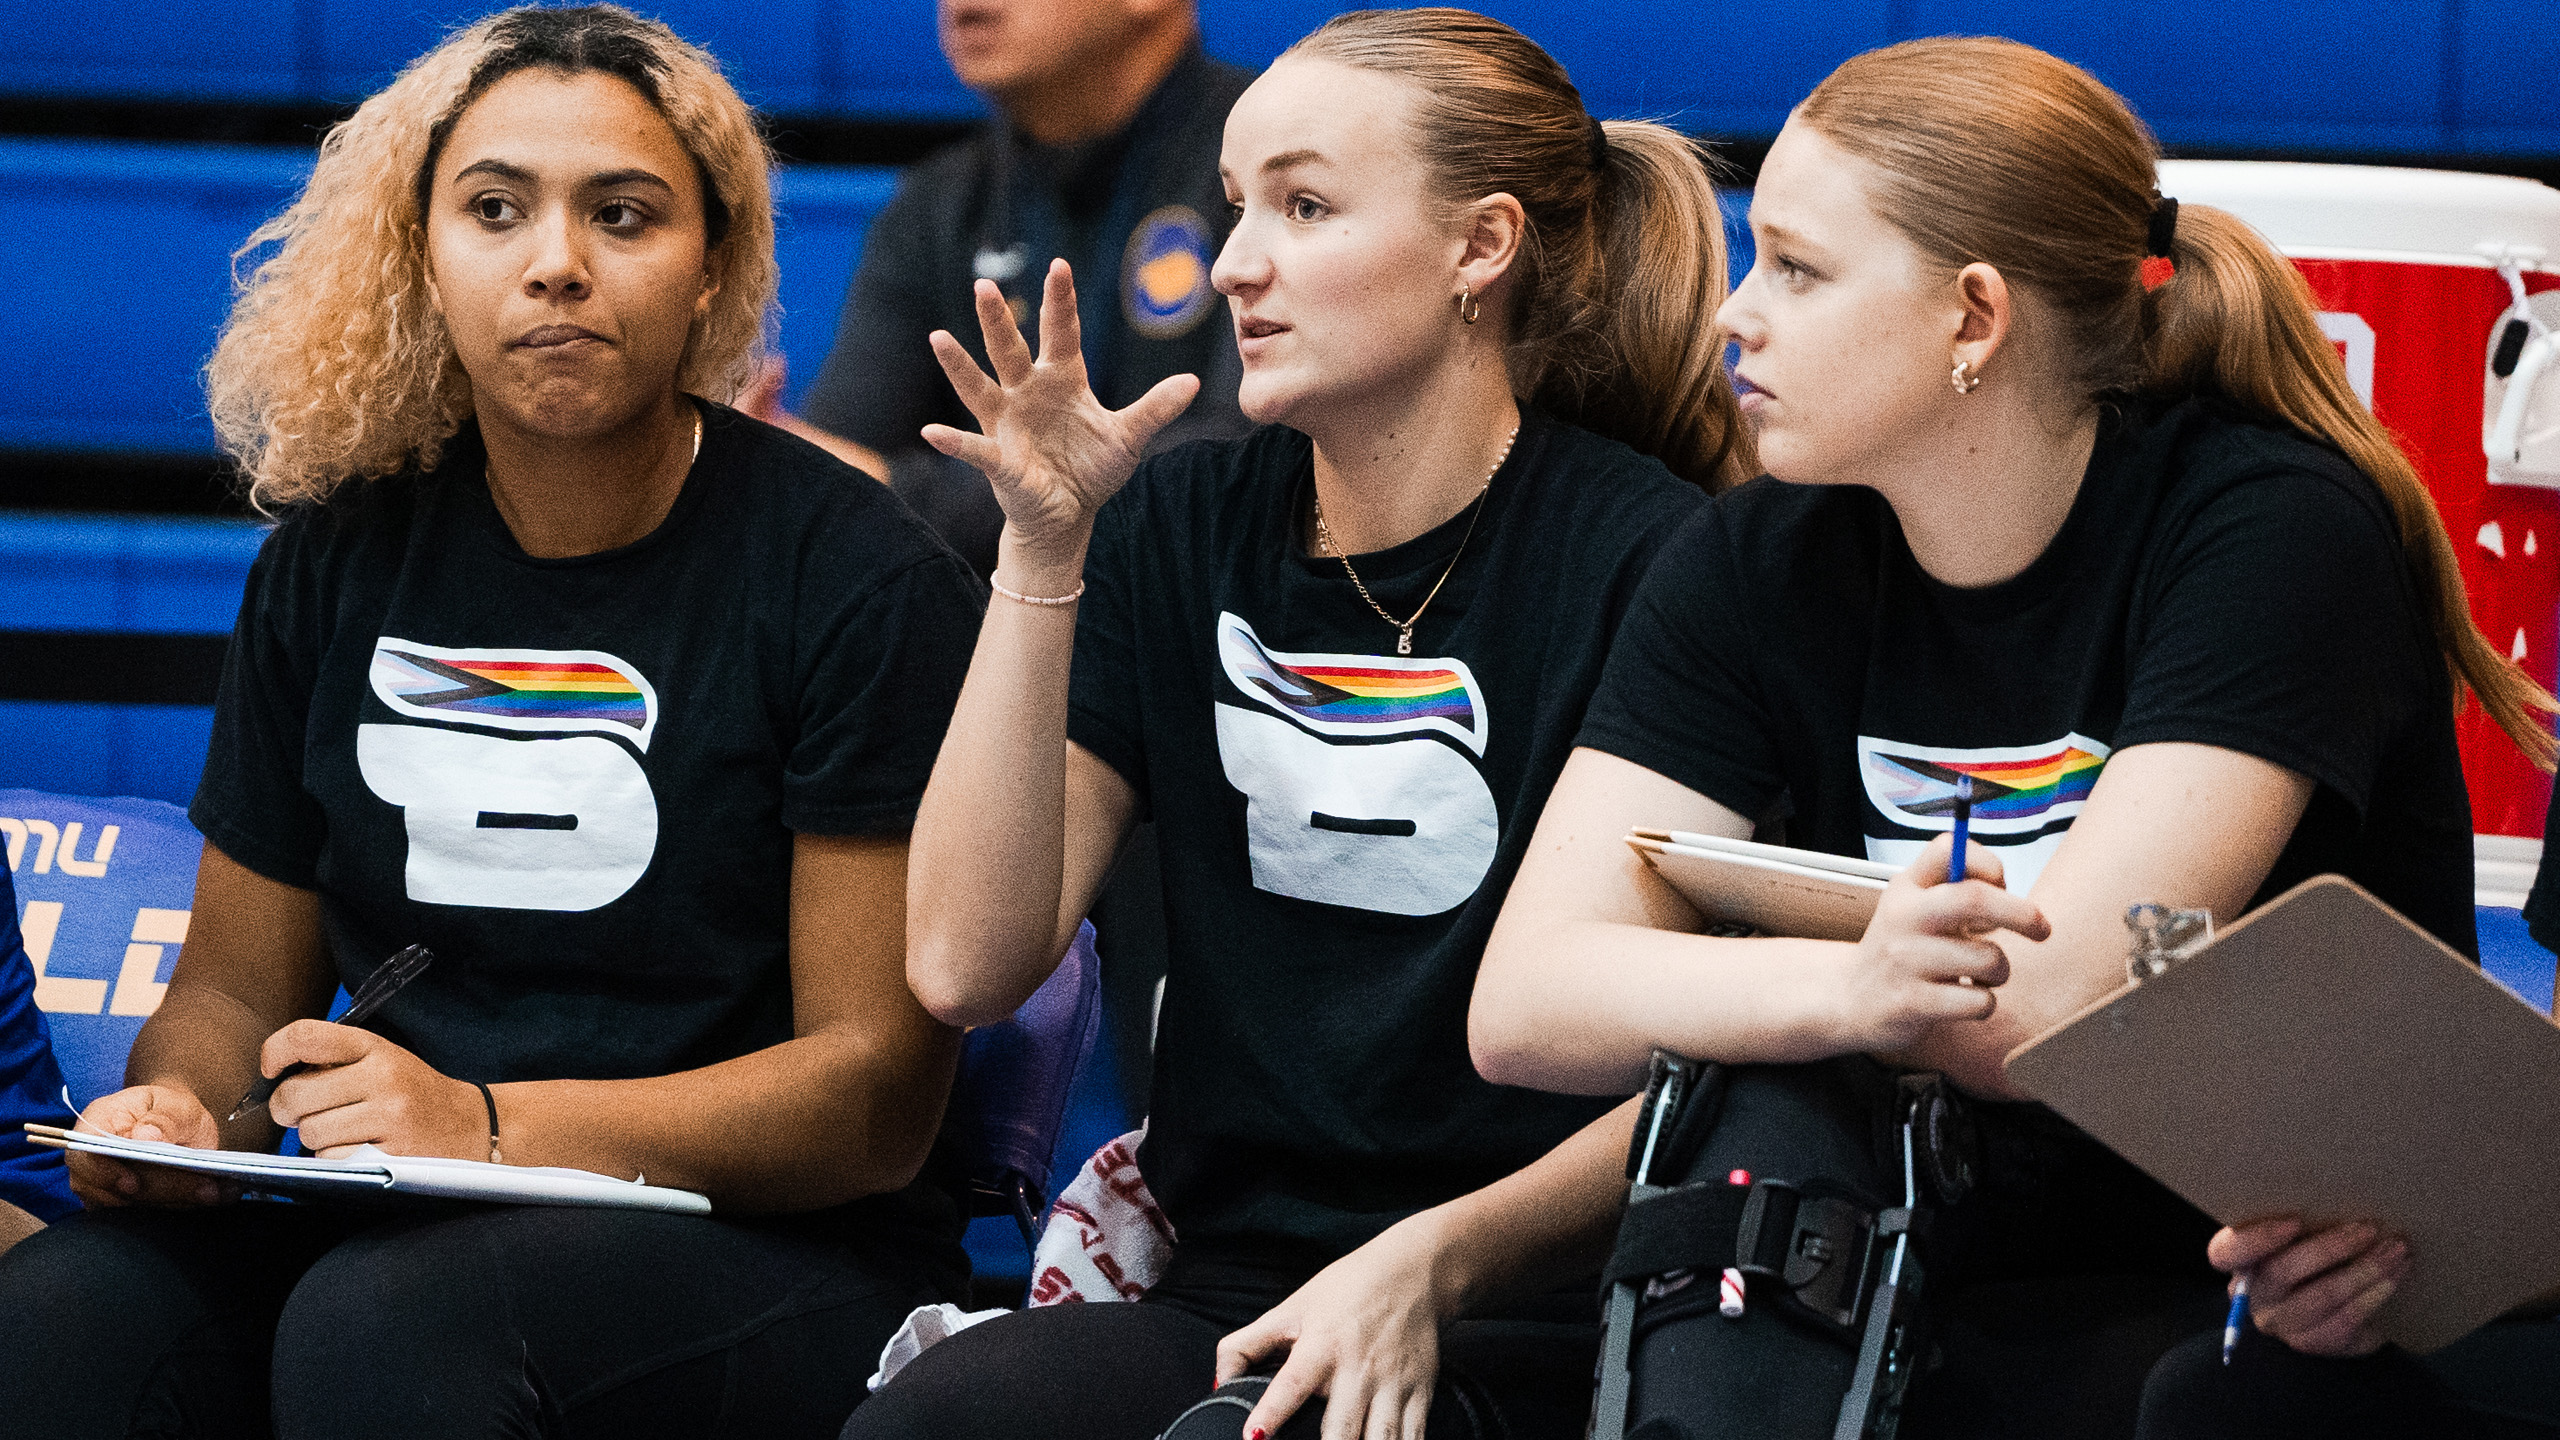 TMU women's volleyball players Maya Griffith, Britney Veltman and Darcie Buchanan sit on the bench while wearing the Bold Pride shirt